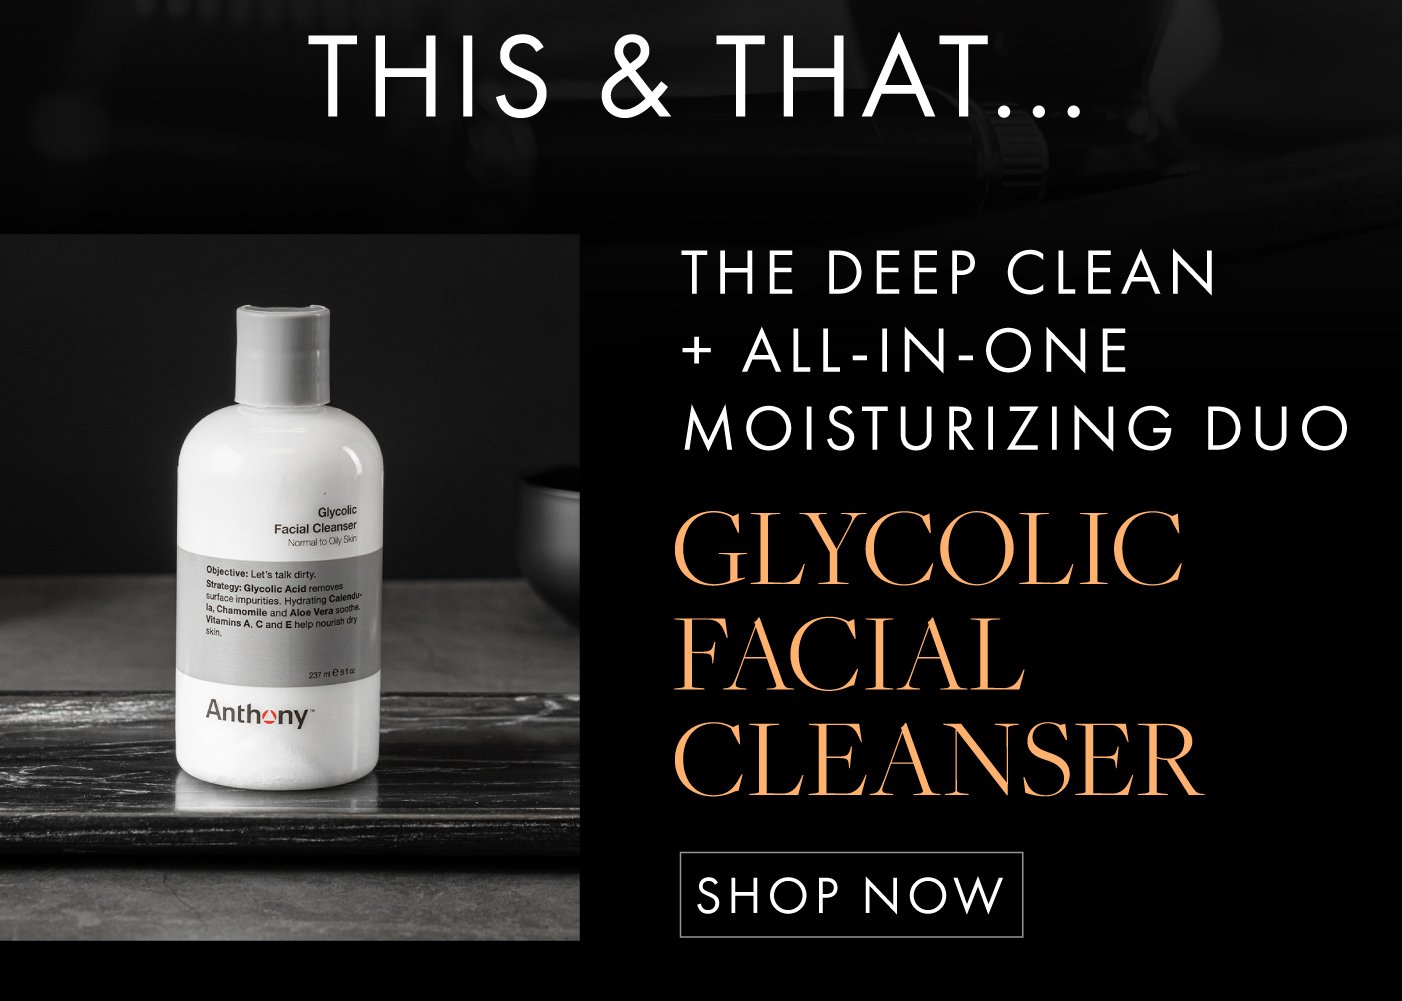 The deep clean + all - in - one moisturizing duo. Glycolic Facial Cleanser